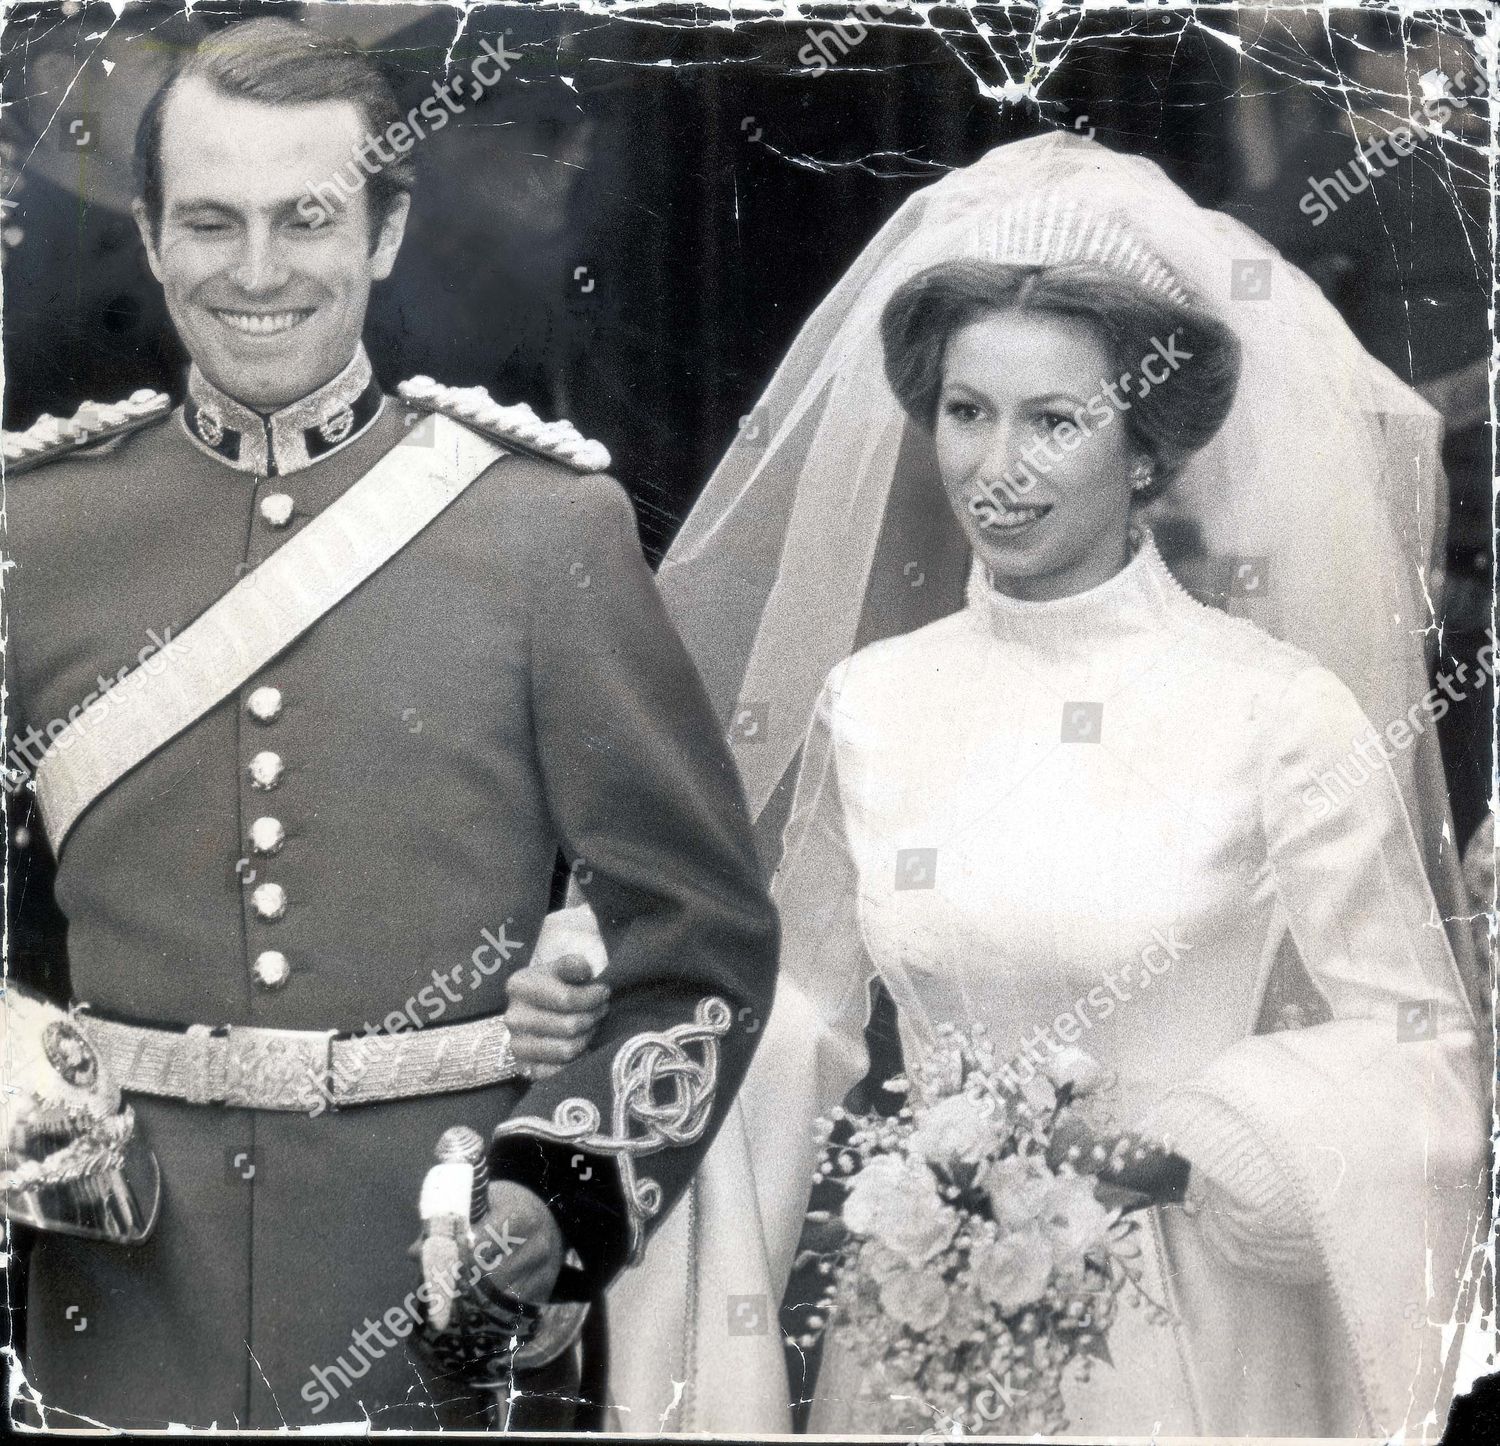 princess-anne-now-princess-royal-wedding-scenes-westminster-abbey-1973-picture-shows-princess-anne-and-mark-philips-after-their-wedding-at-westminster-abbey-shutterstock-editorial-895557a.jpg